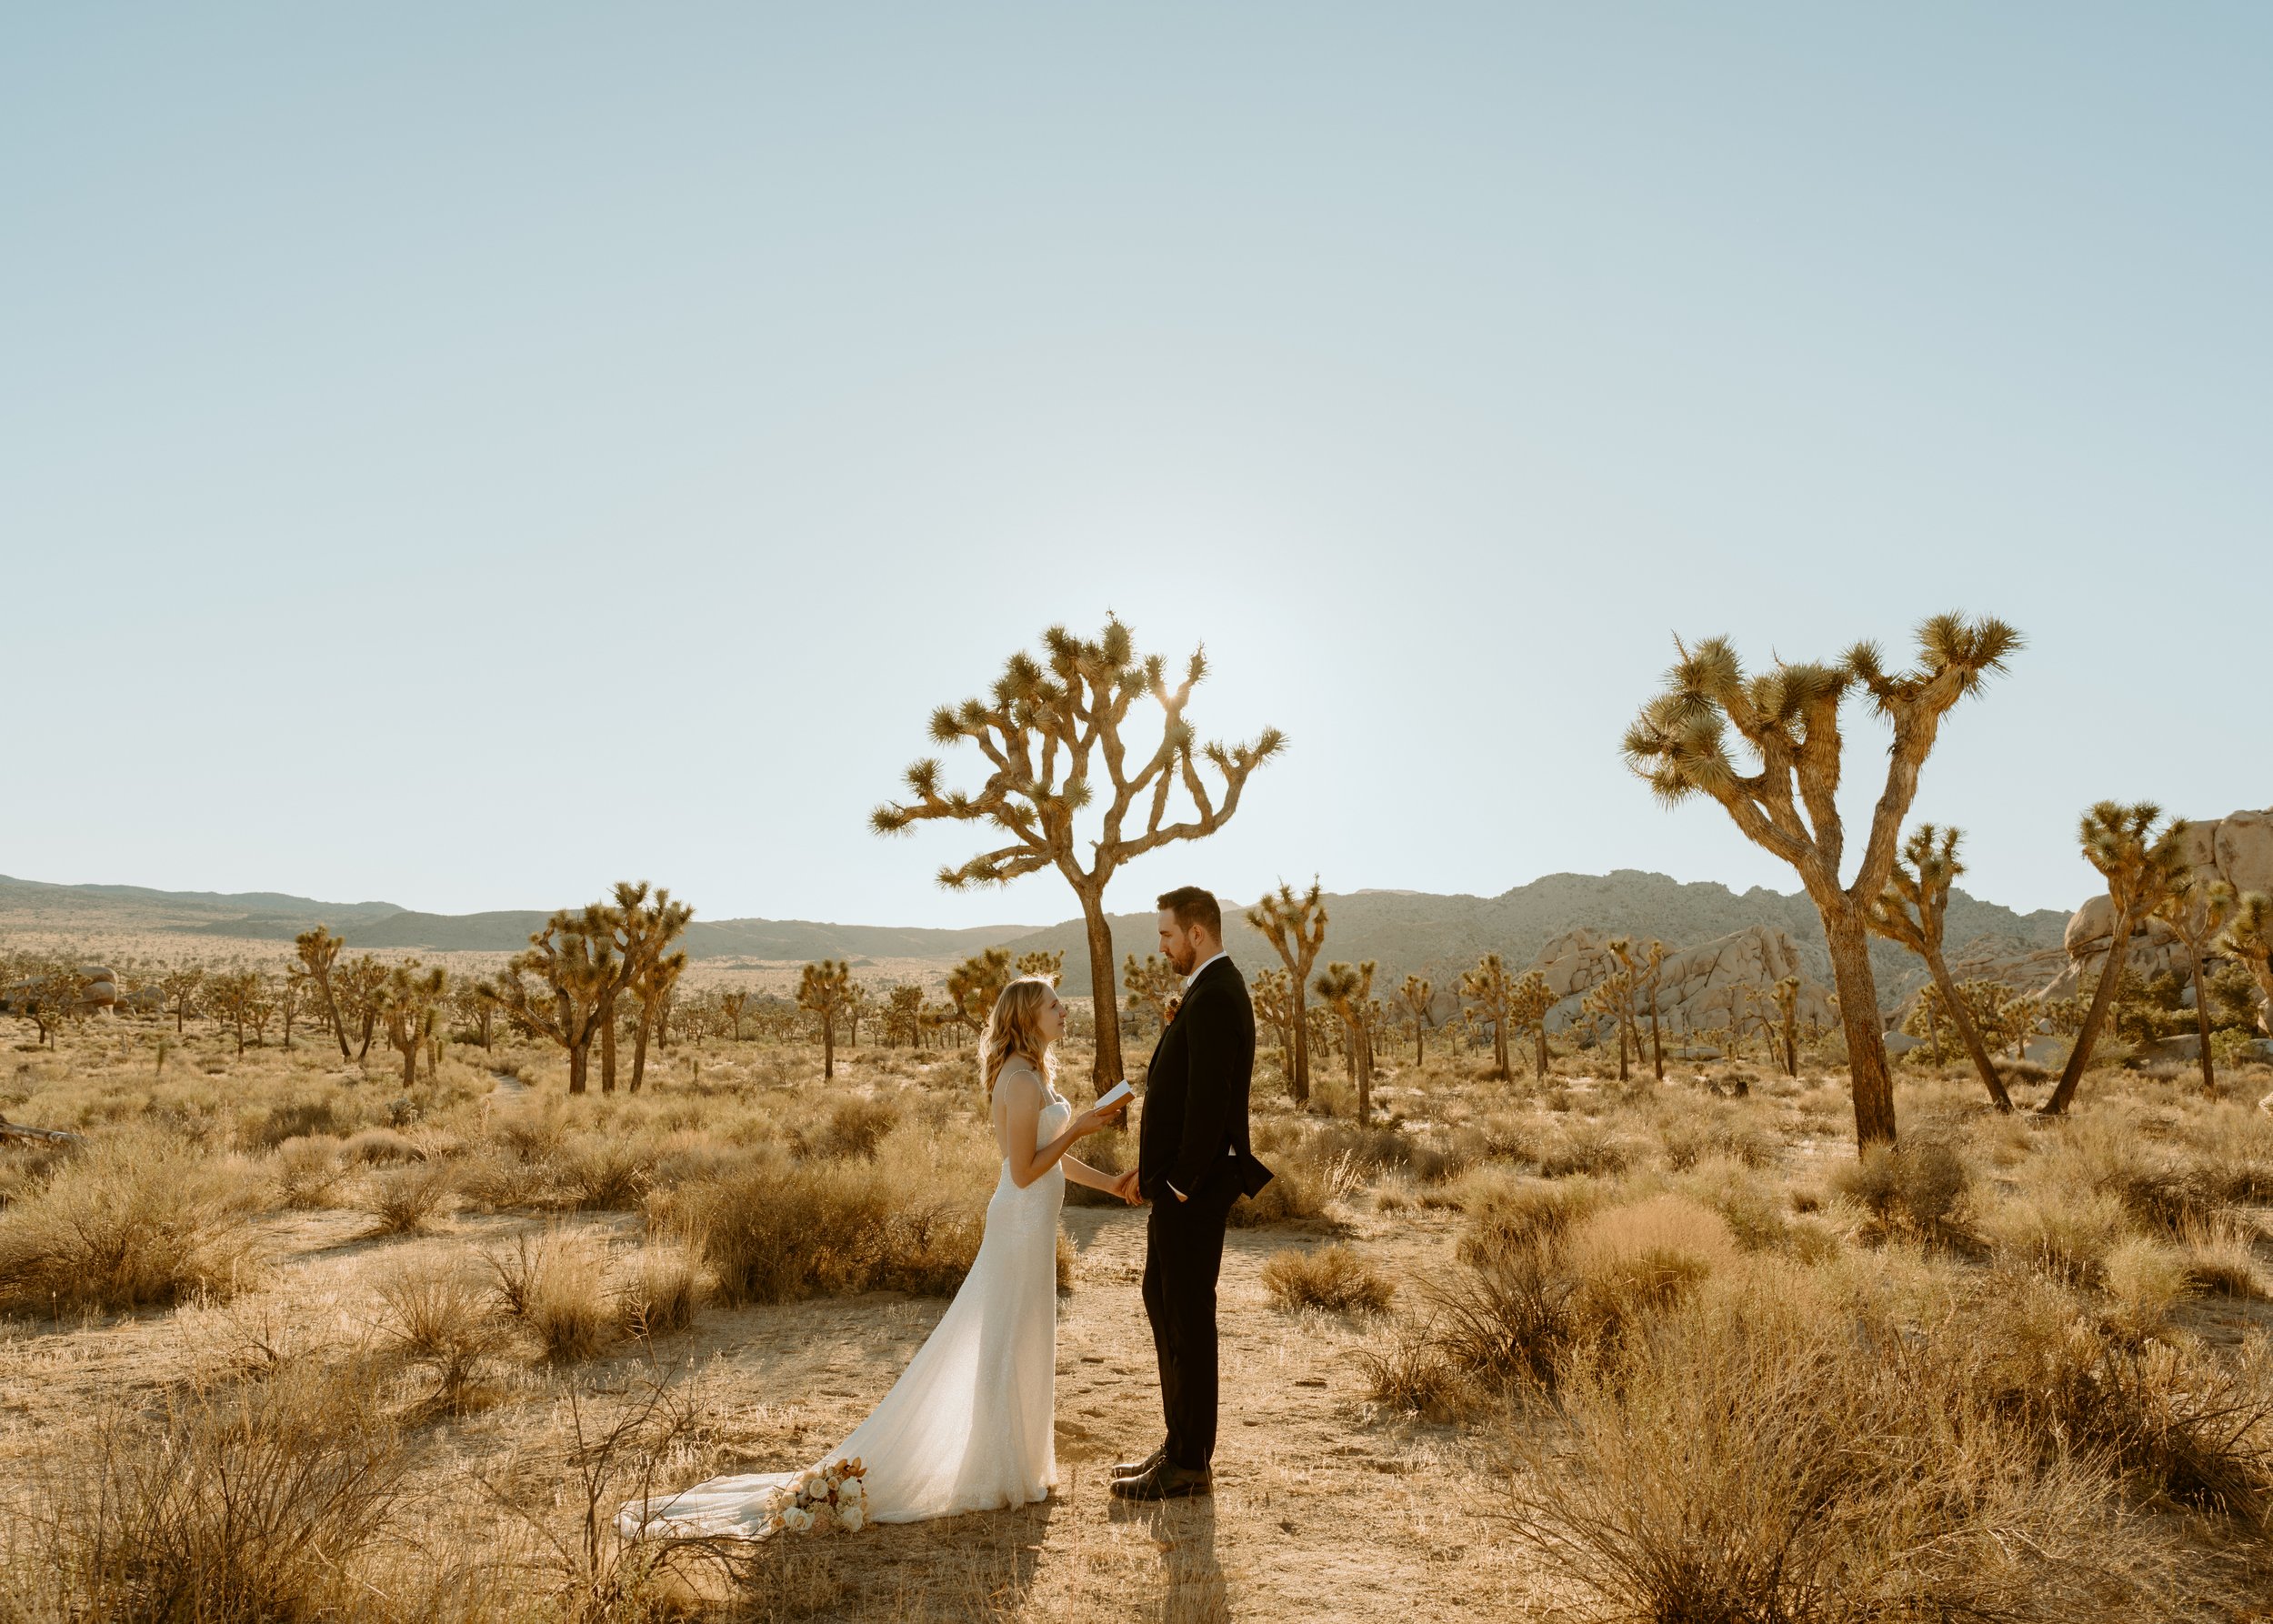 How to Elope | Everything You Need to Know About Planning an Elopement  | Elopement Photographer | Elopement Planning Tips | Eloping Tips | #elopement